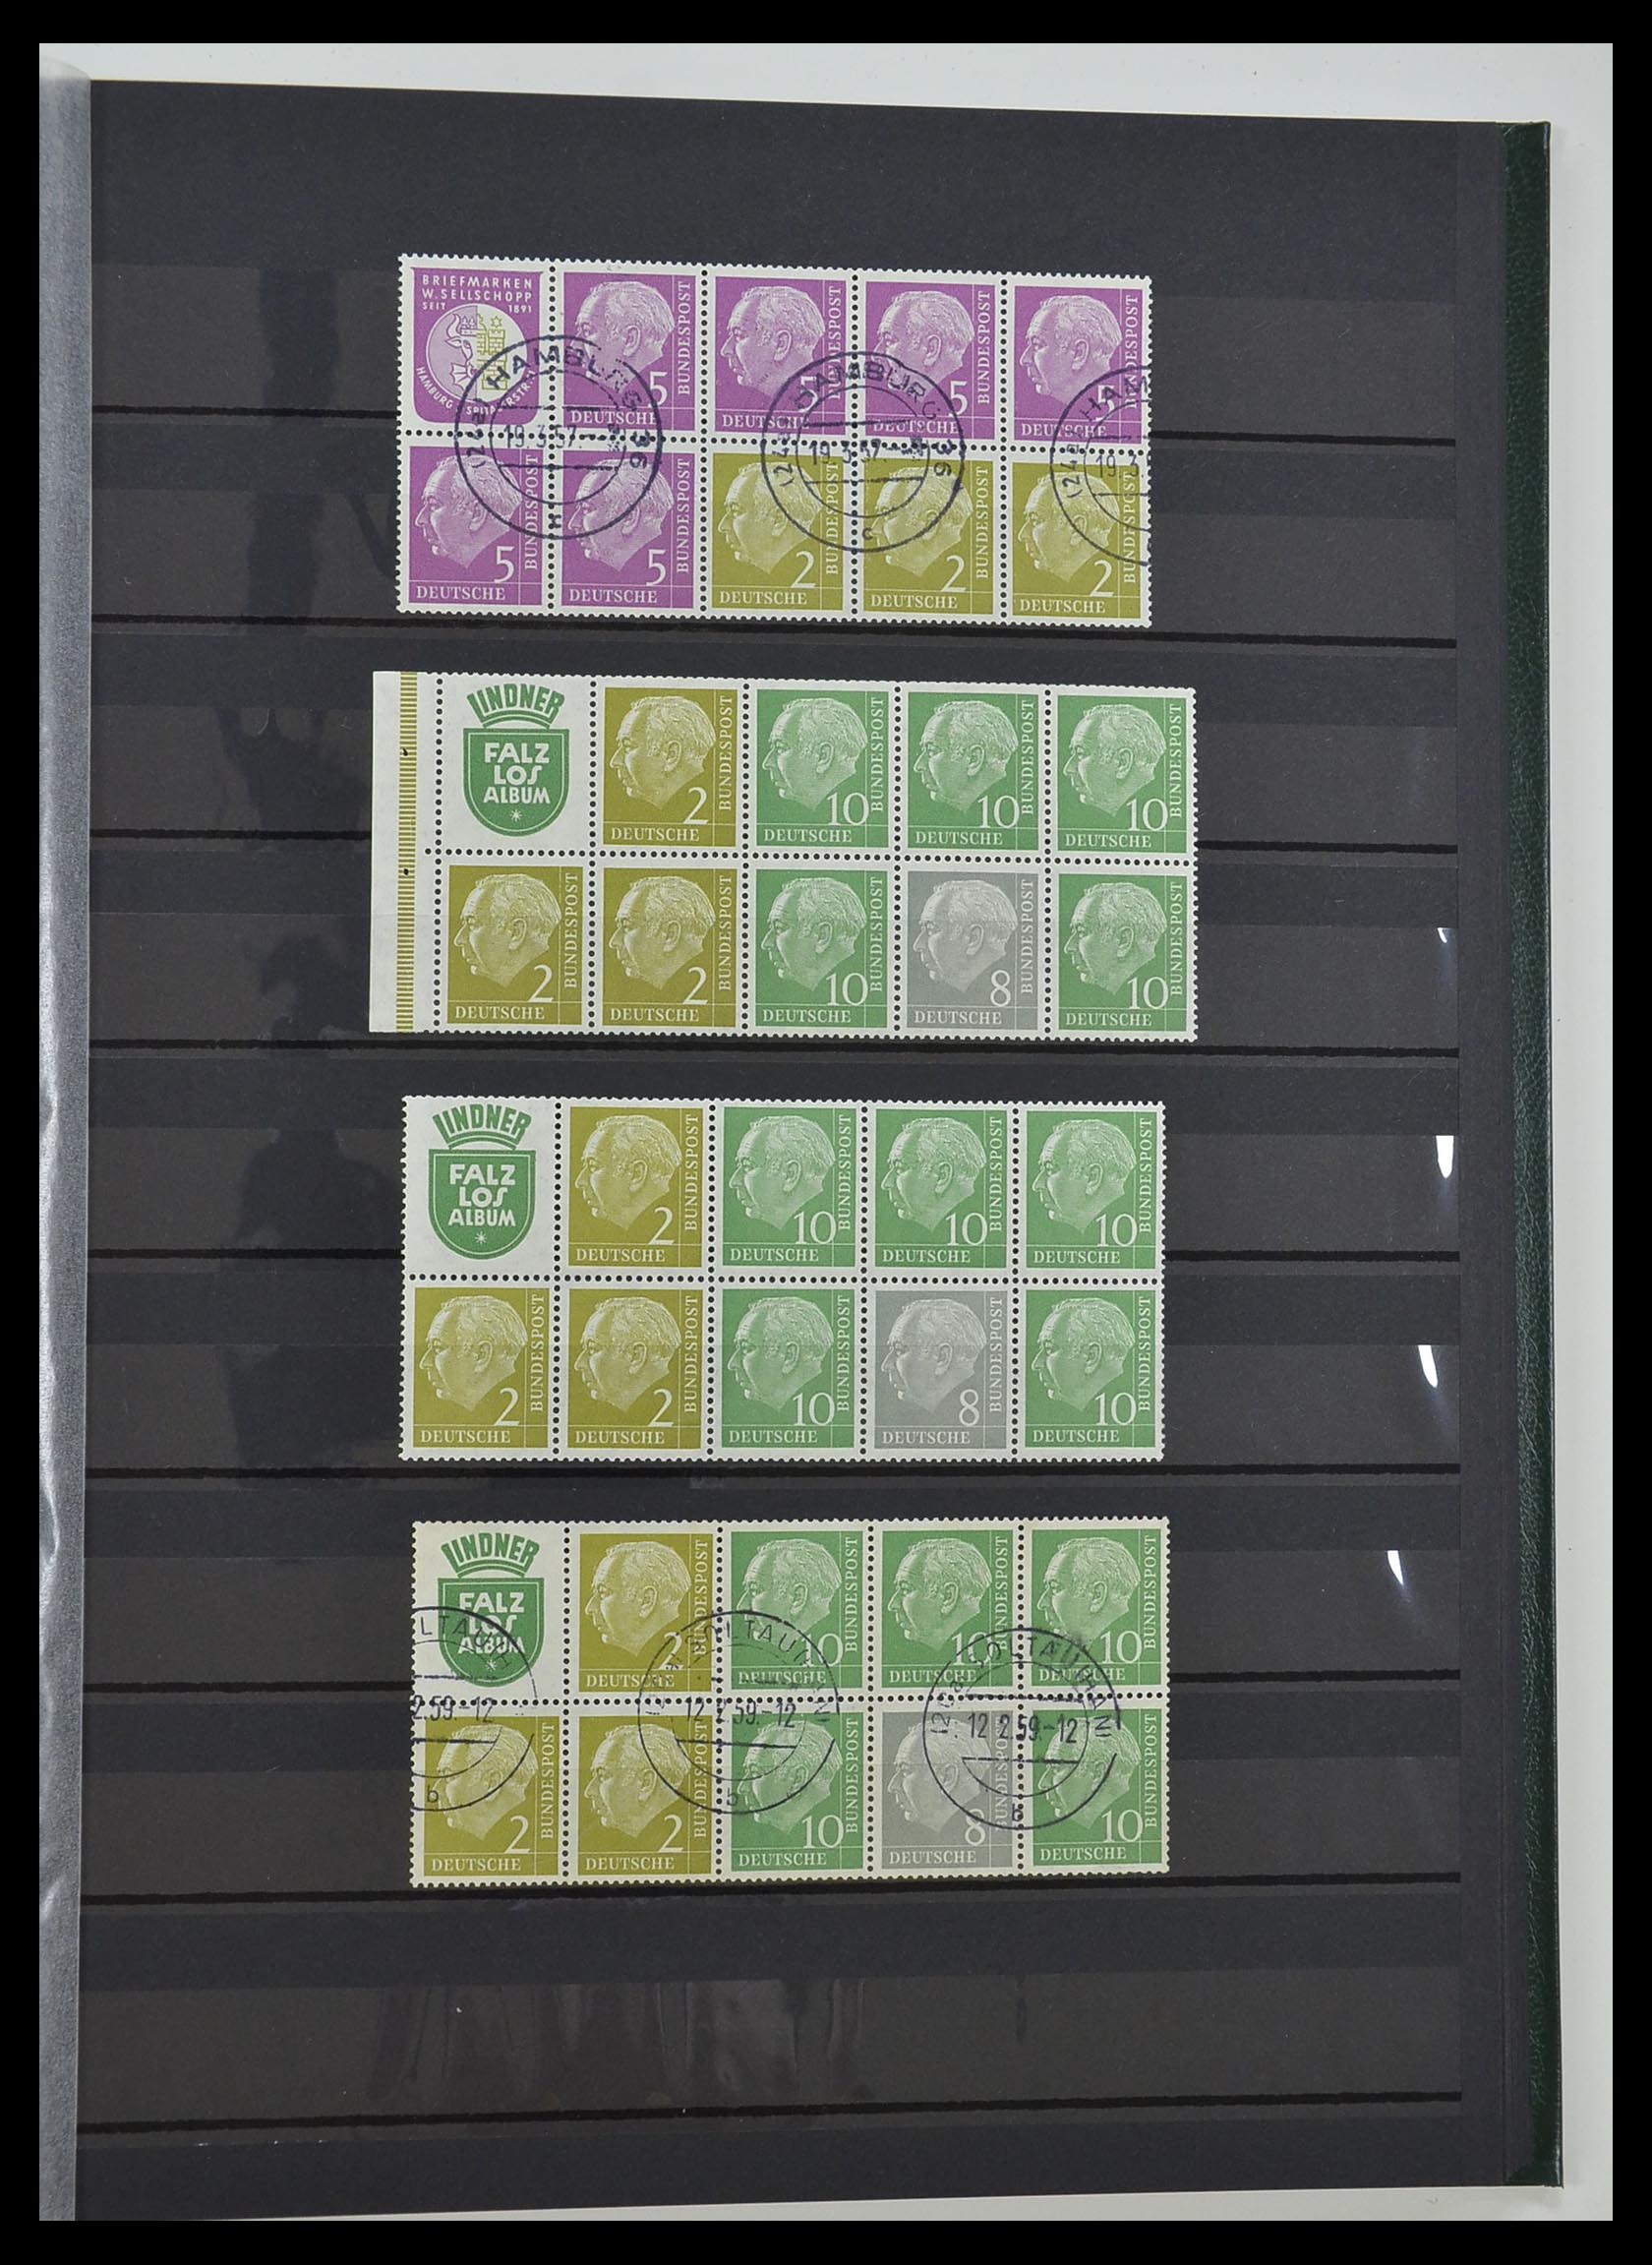 33275 035 - Stamp collection 33275 Bundespost combinations 1951-1960.